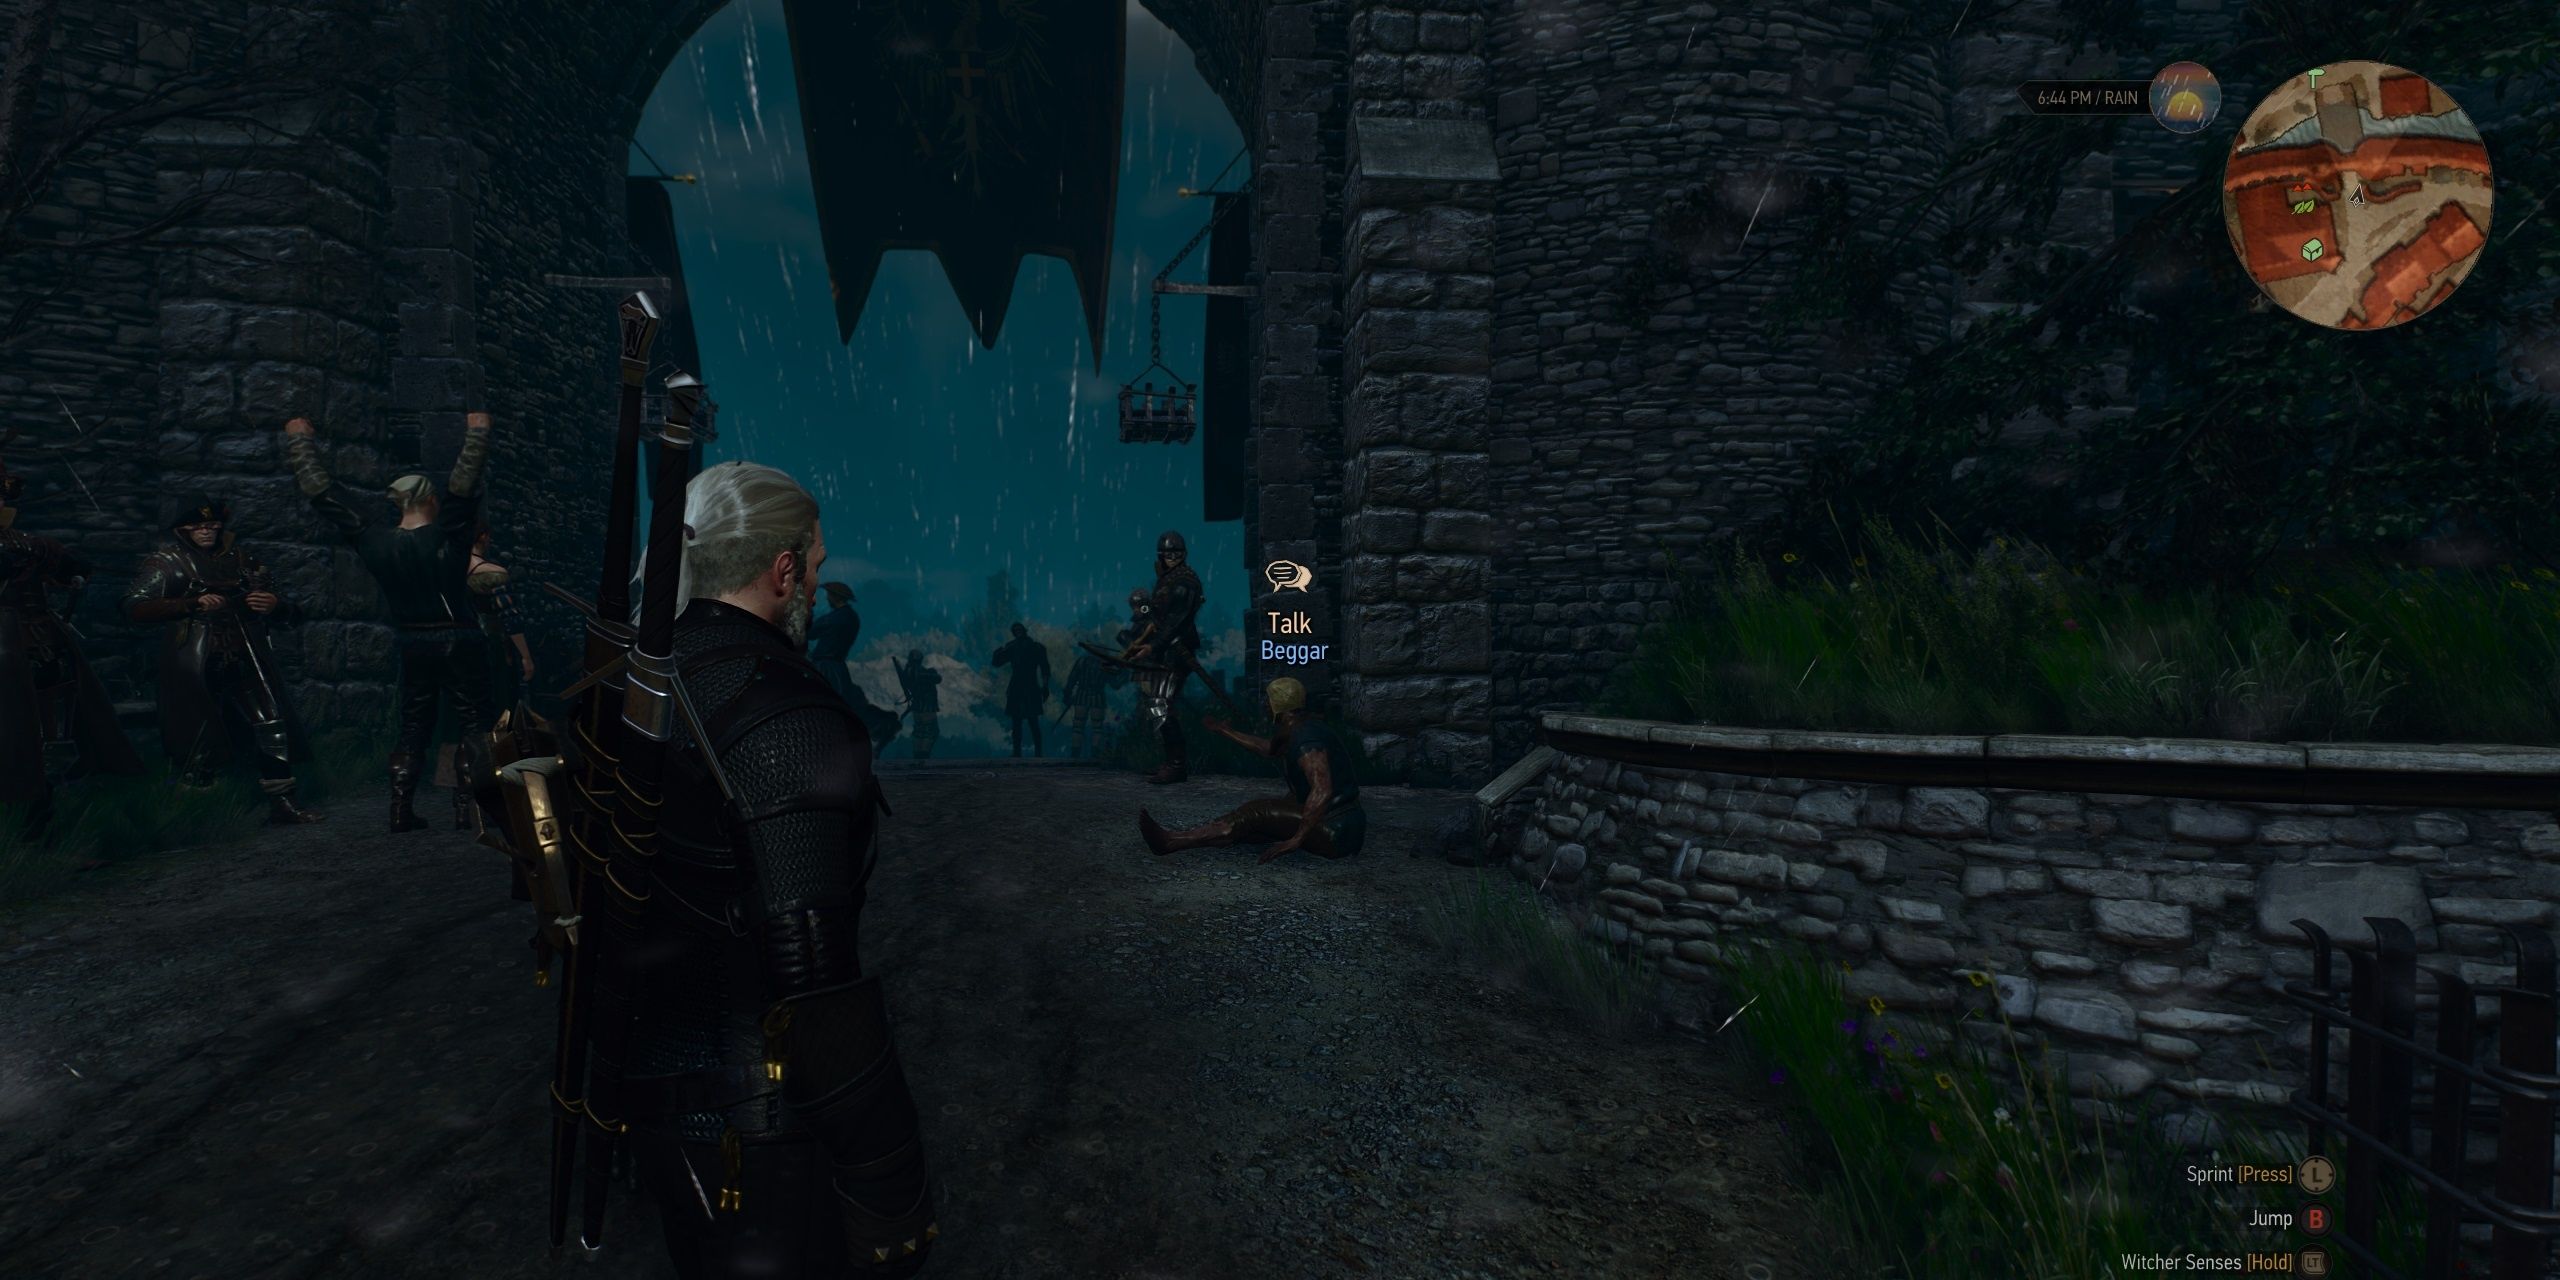 Water droplets screen effect in The Witcher 3